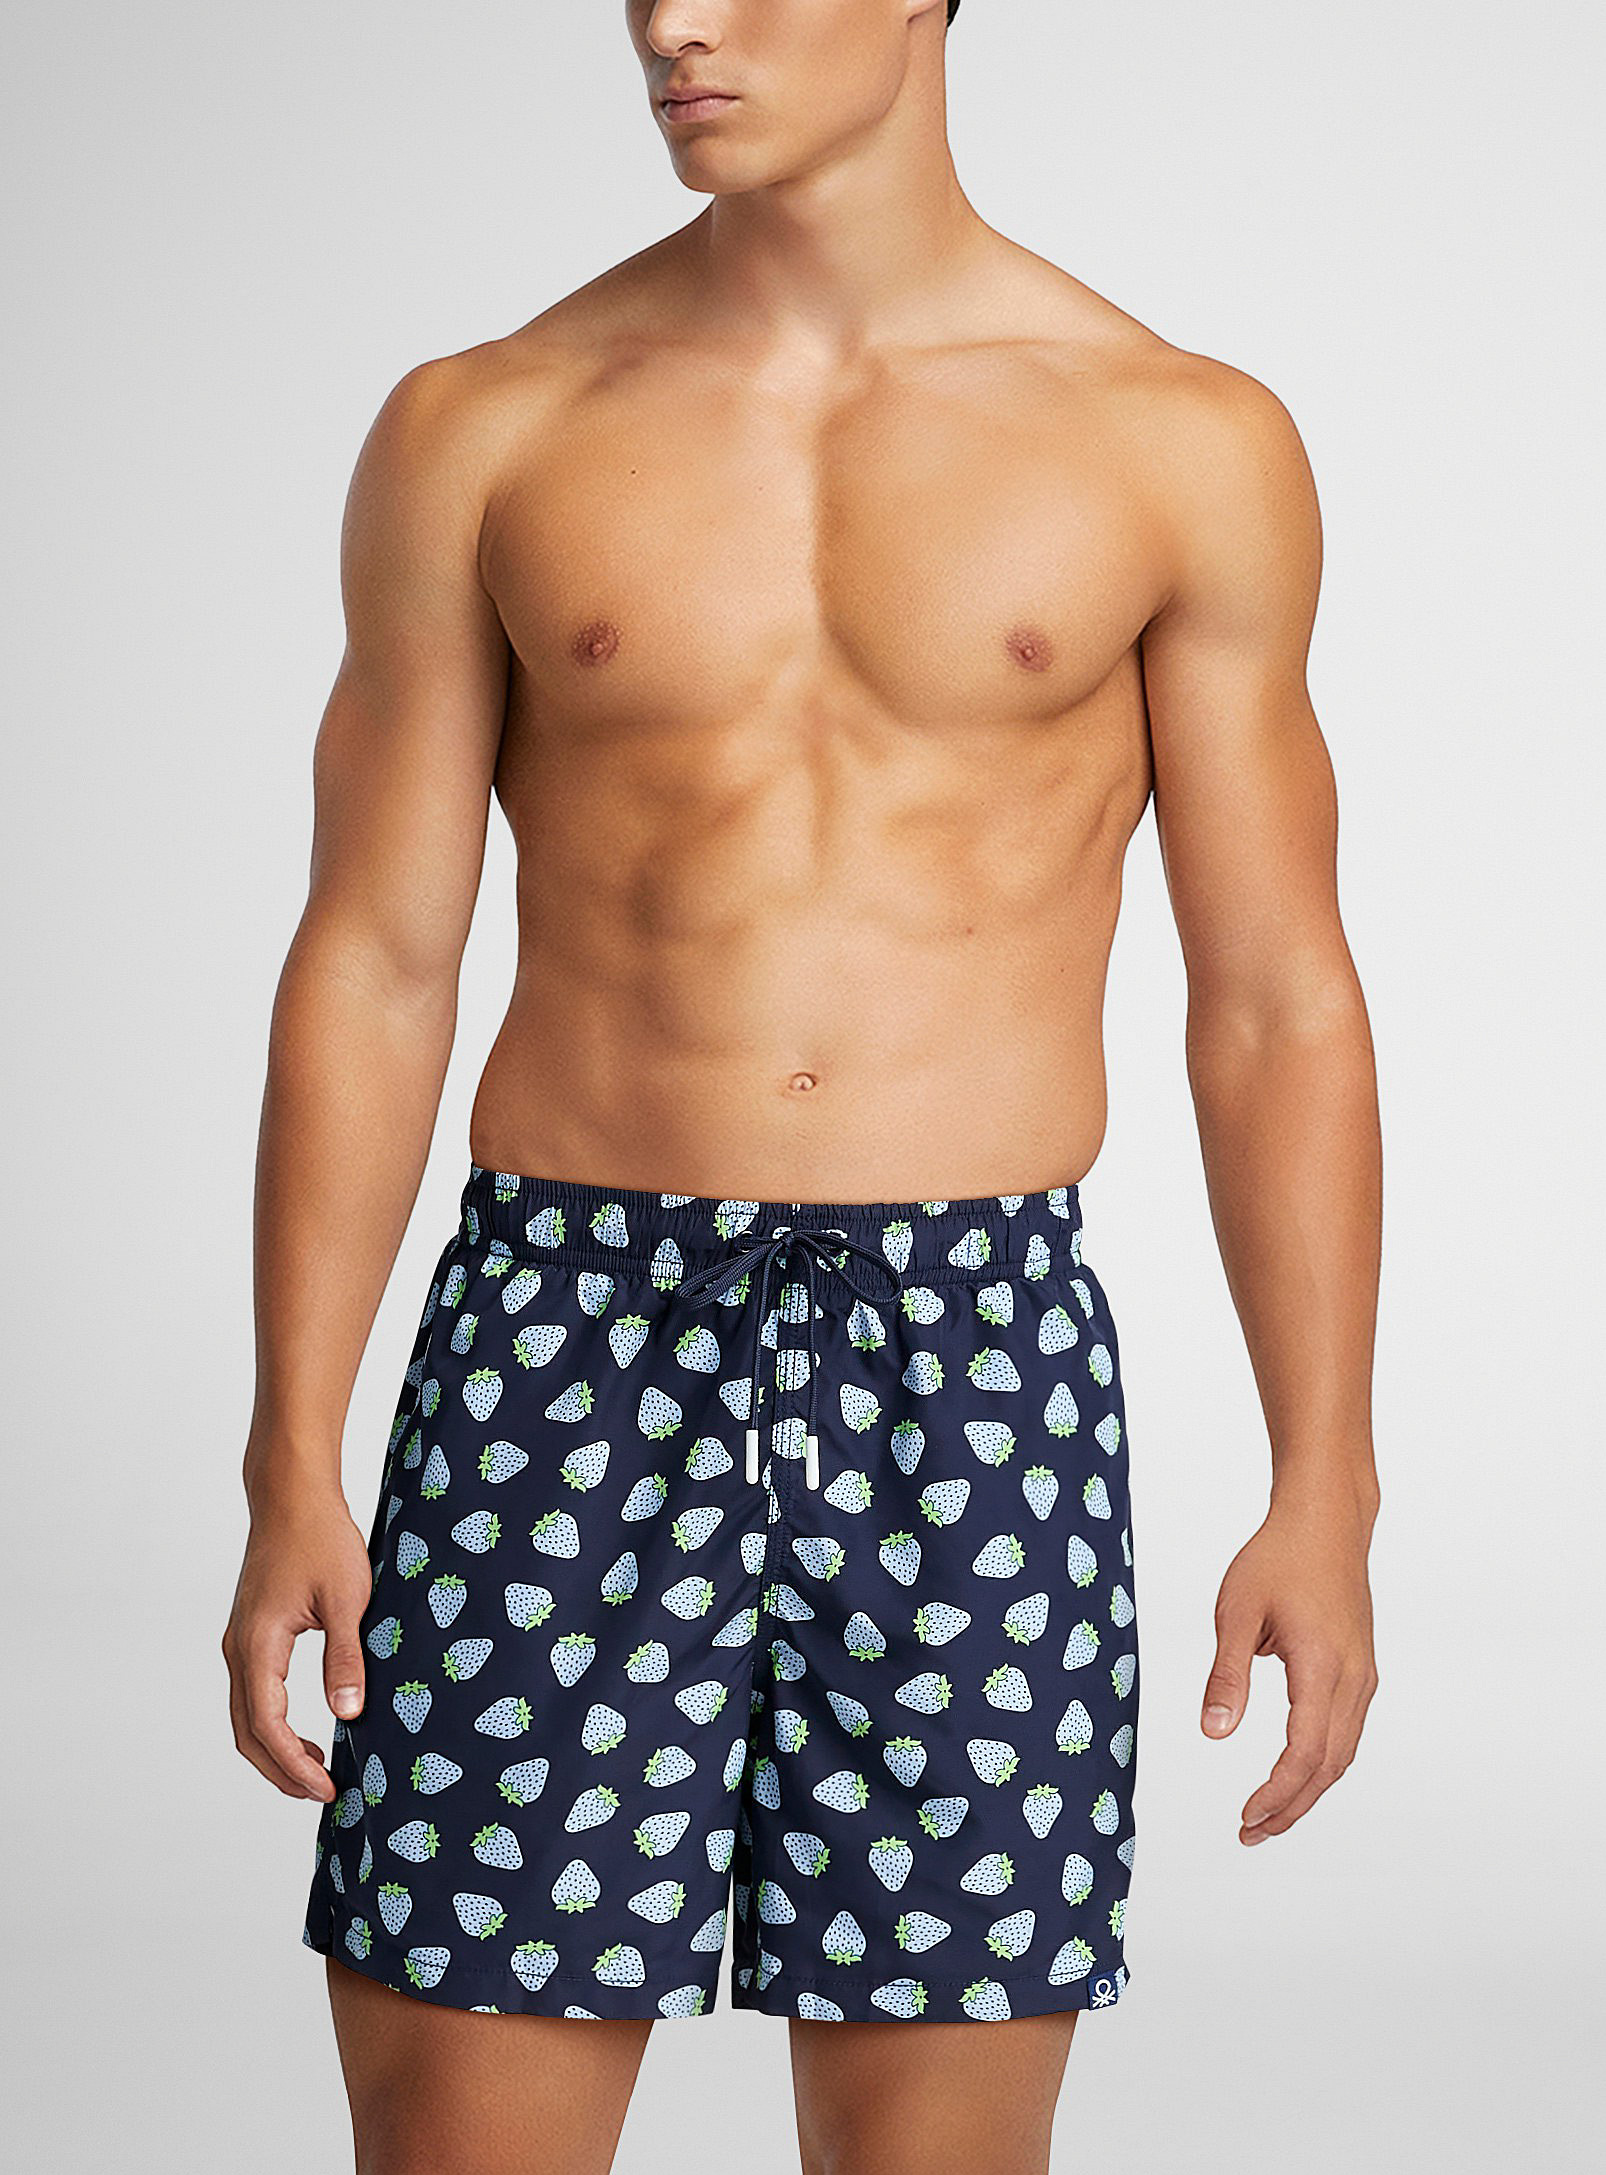 United Colors Of Benetton Muted Strawberry Swim Trunk In Pattern